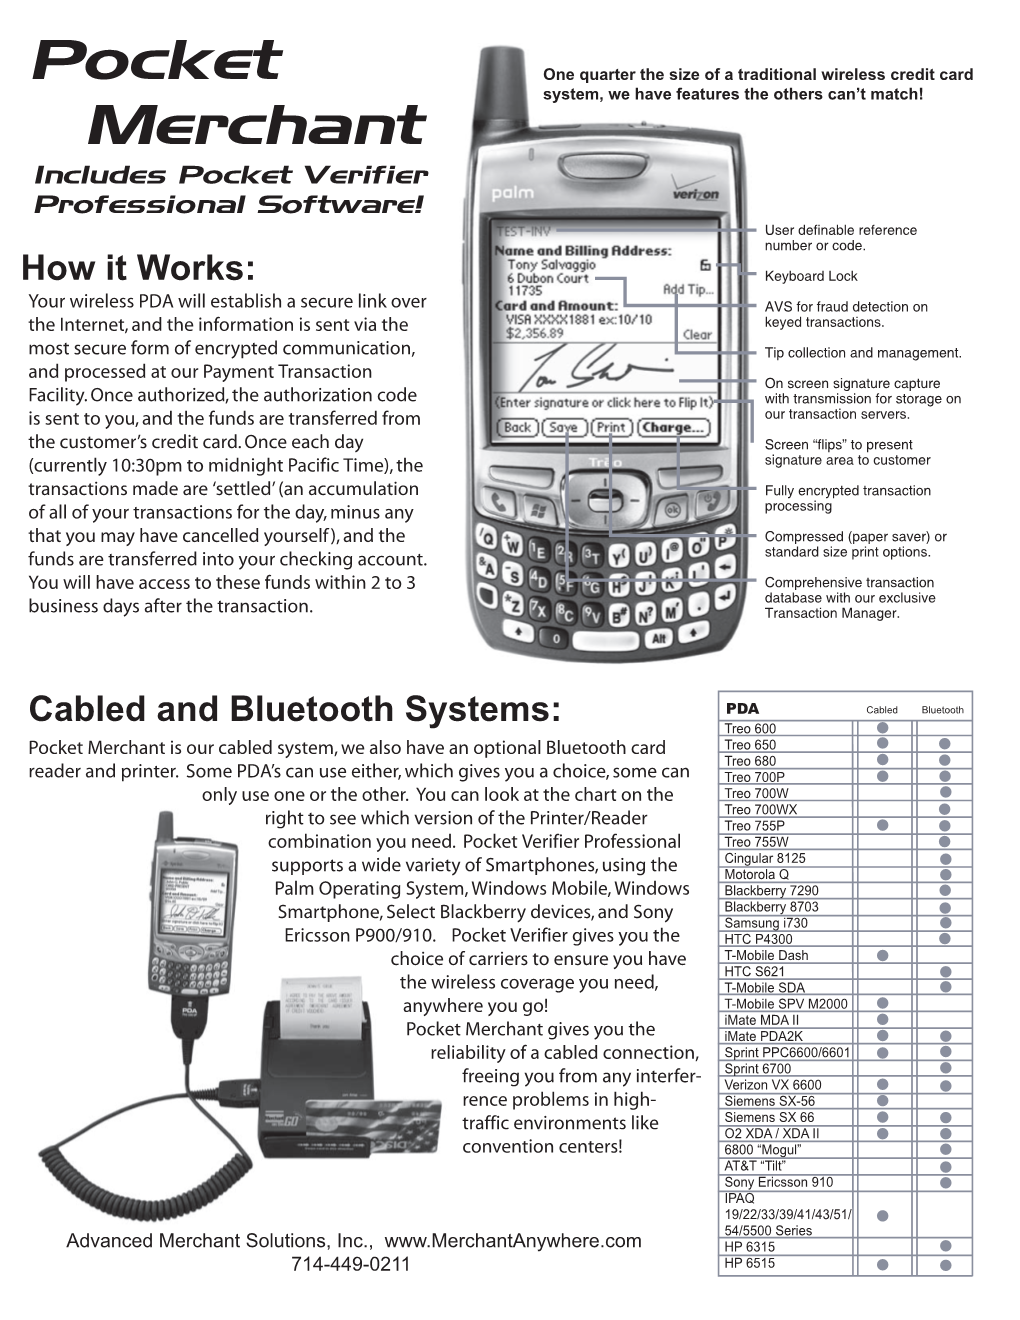 Pocket Merchant Is Our Cabled System, We Also Have an Optional Bluetooth Card Treo 650 Treo 680 Reader and Printer